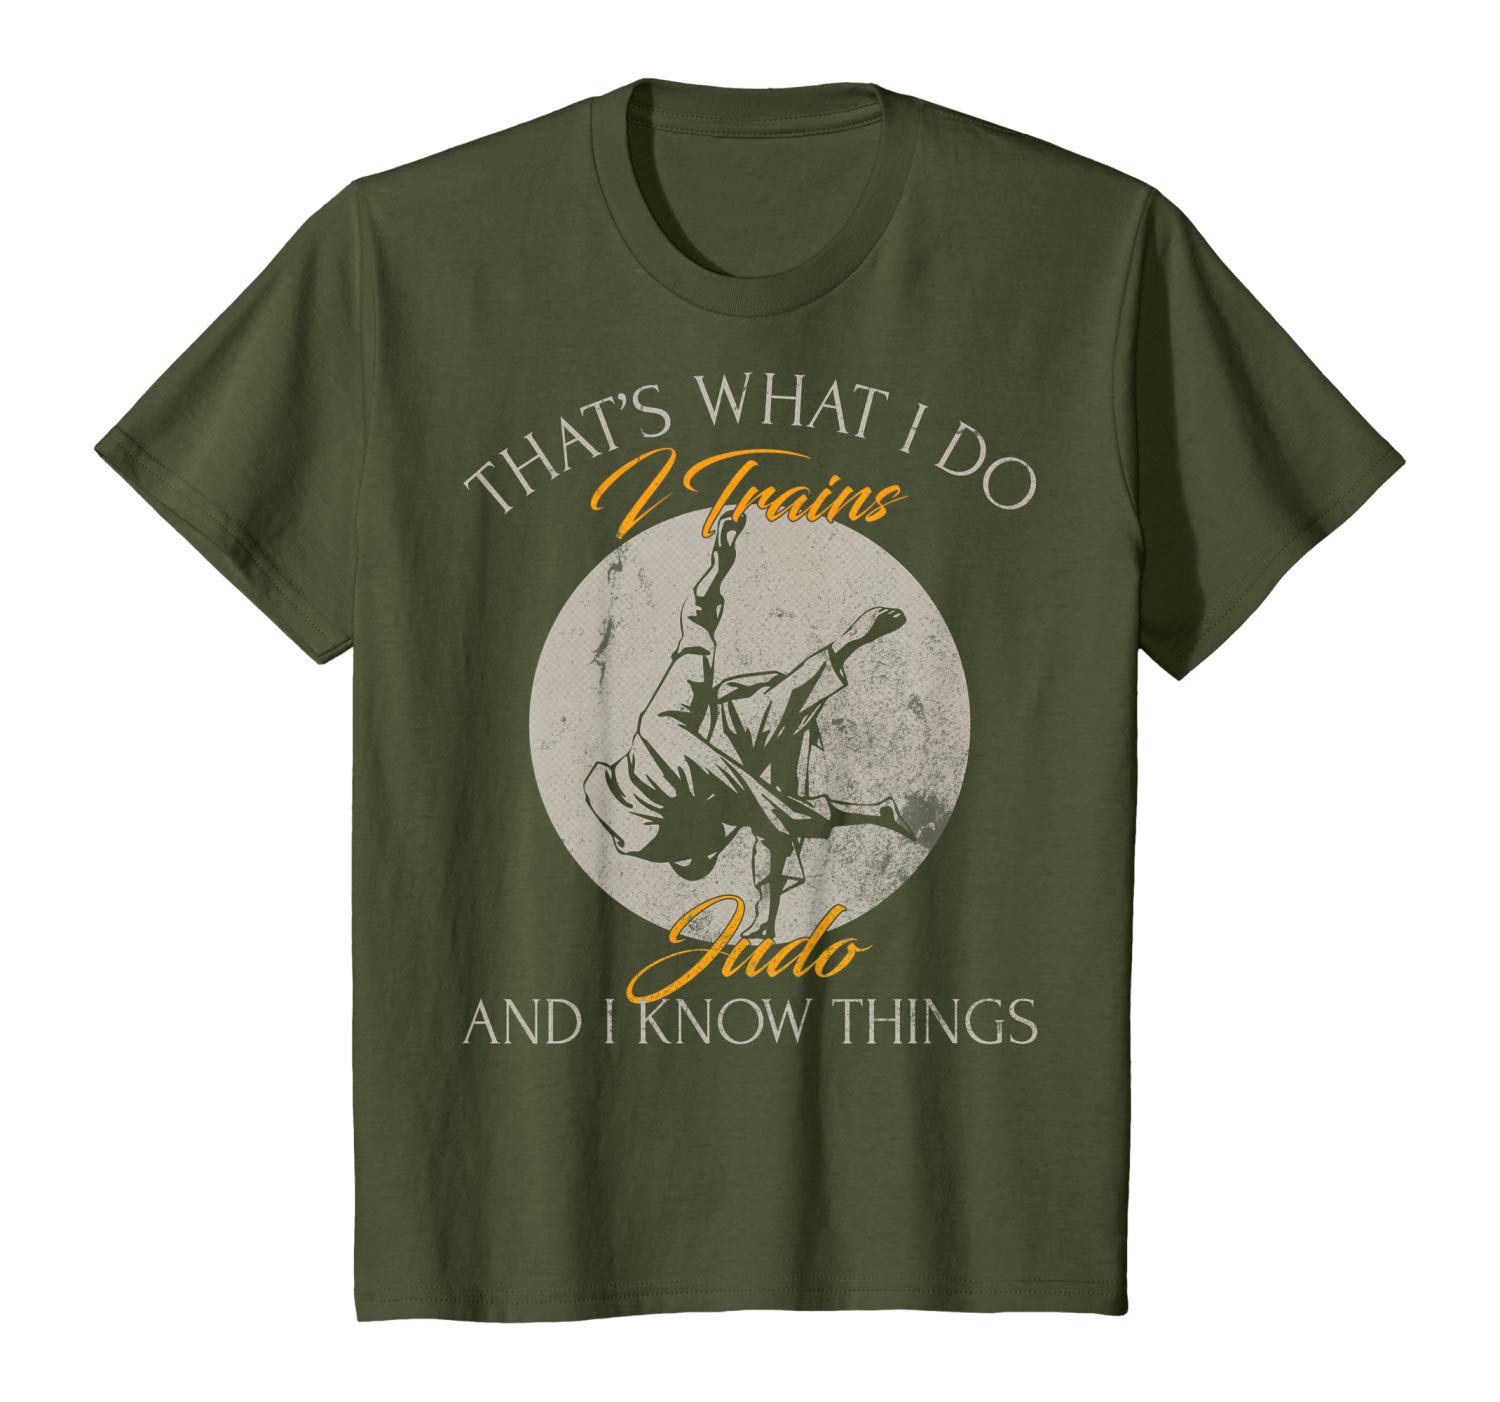 Awesome That's What I Do, I Trains Judo And I Know Things Funny Gift T-Shirt T-Shirt Sweatshirt Hoodie